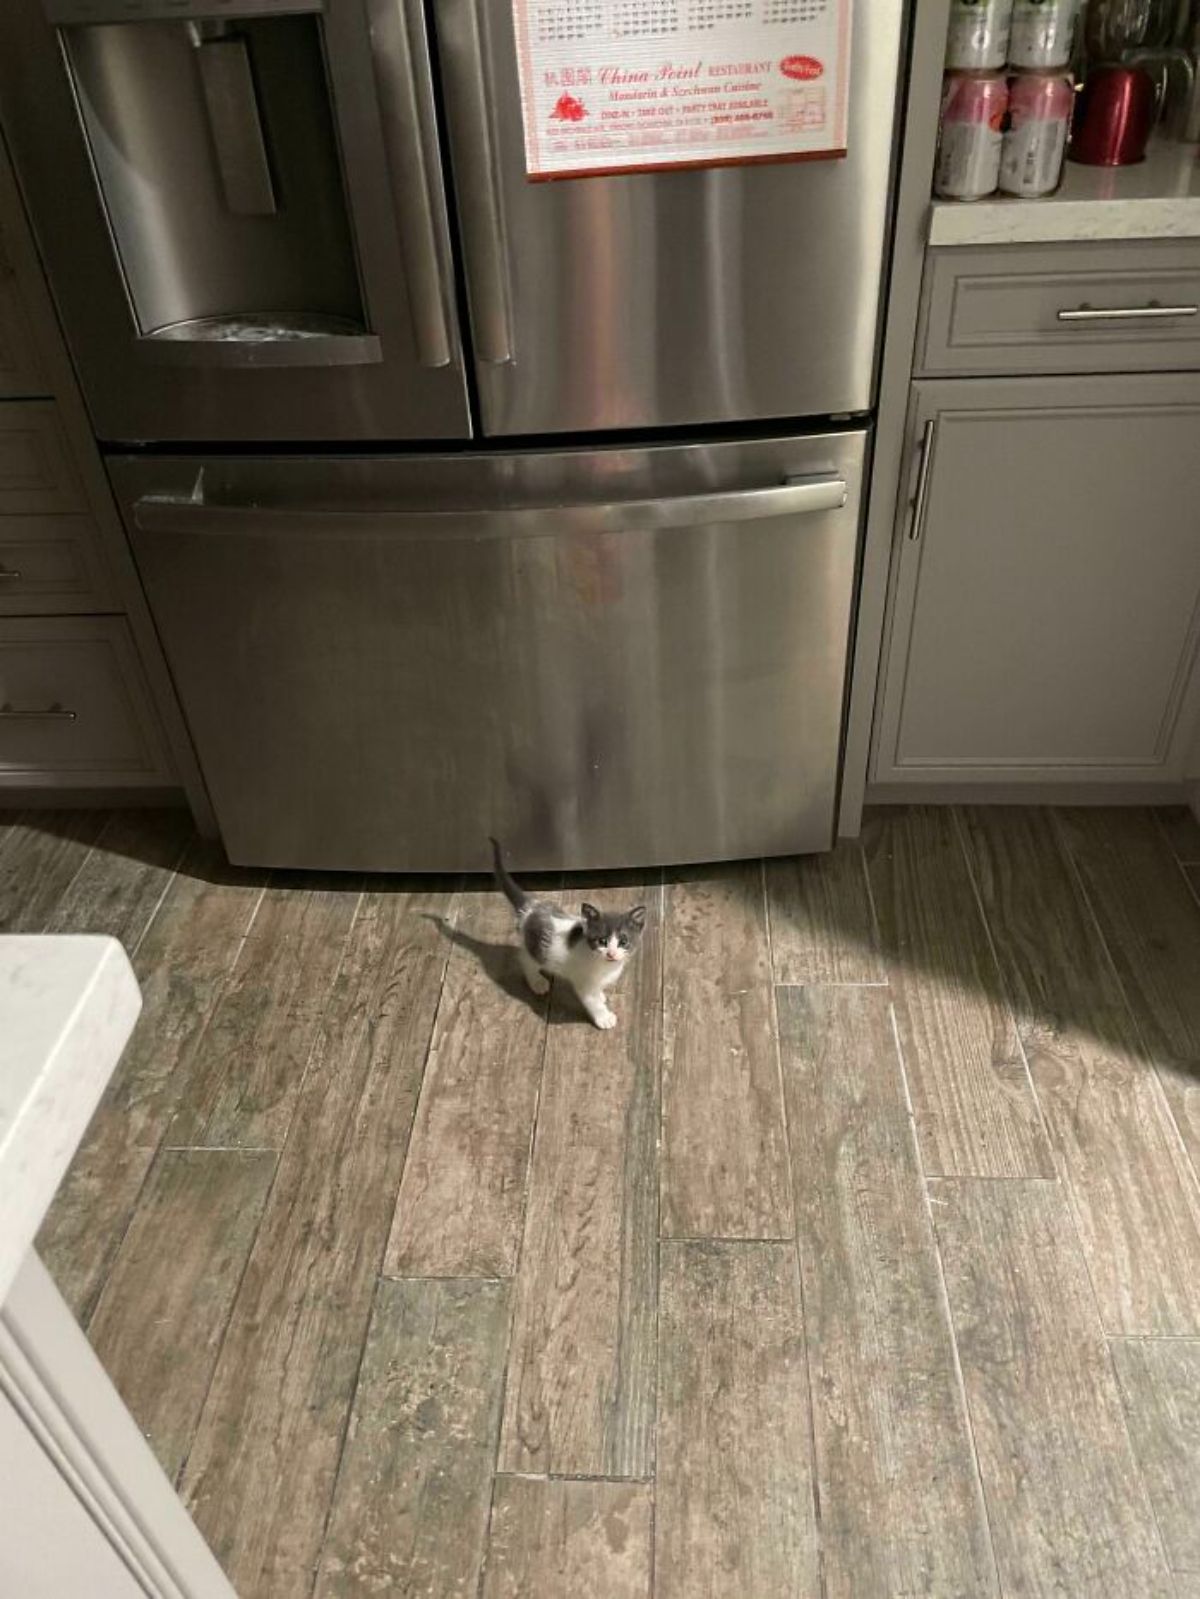 grey and white kitten standing next to a fridge